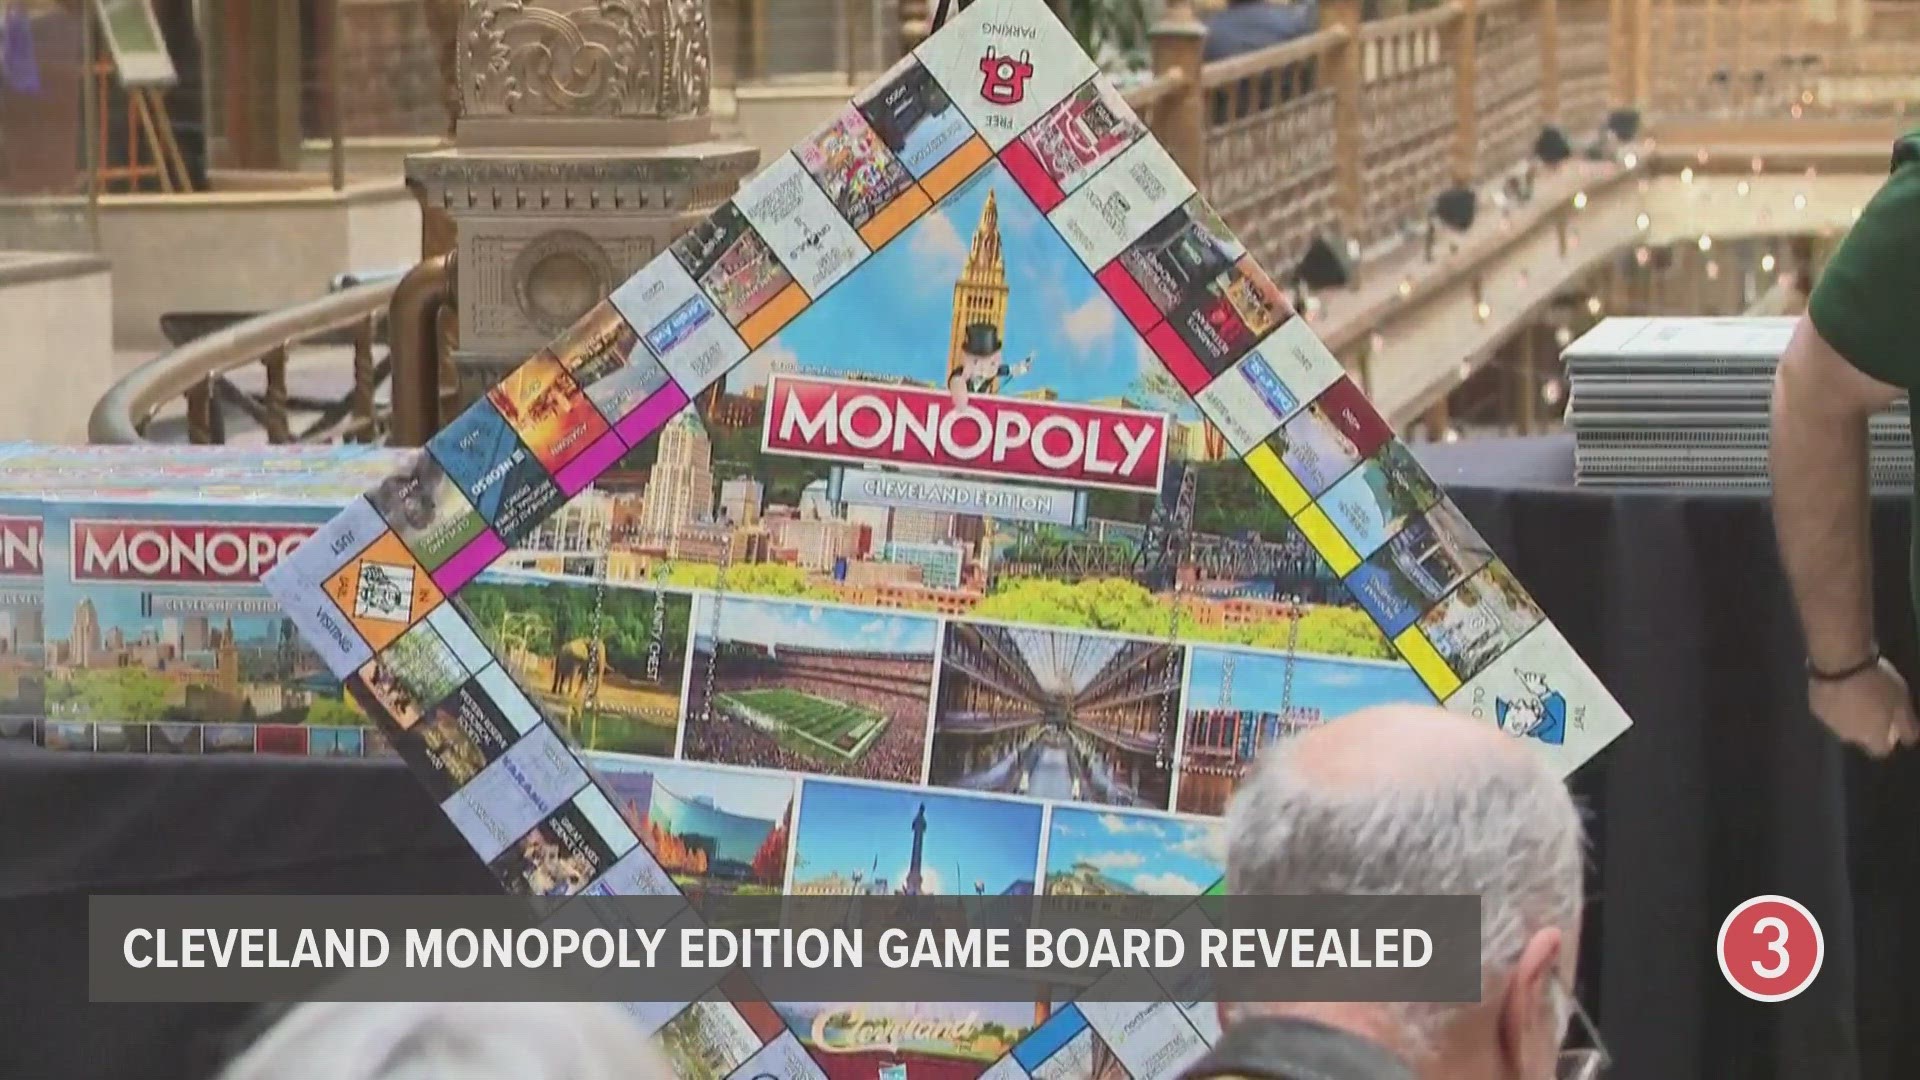 WKYC Studios is thrilled to be included as one of the spots on the Cleveland Monopoly board game.